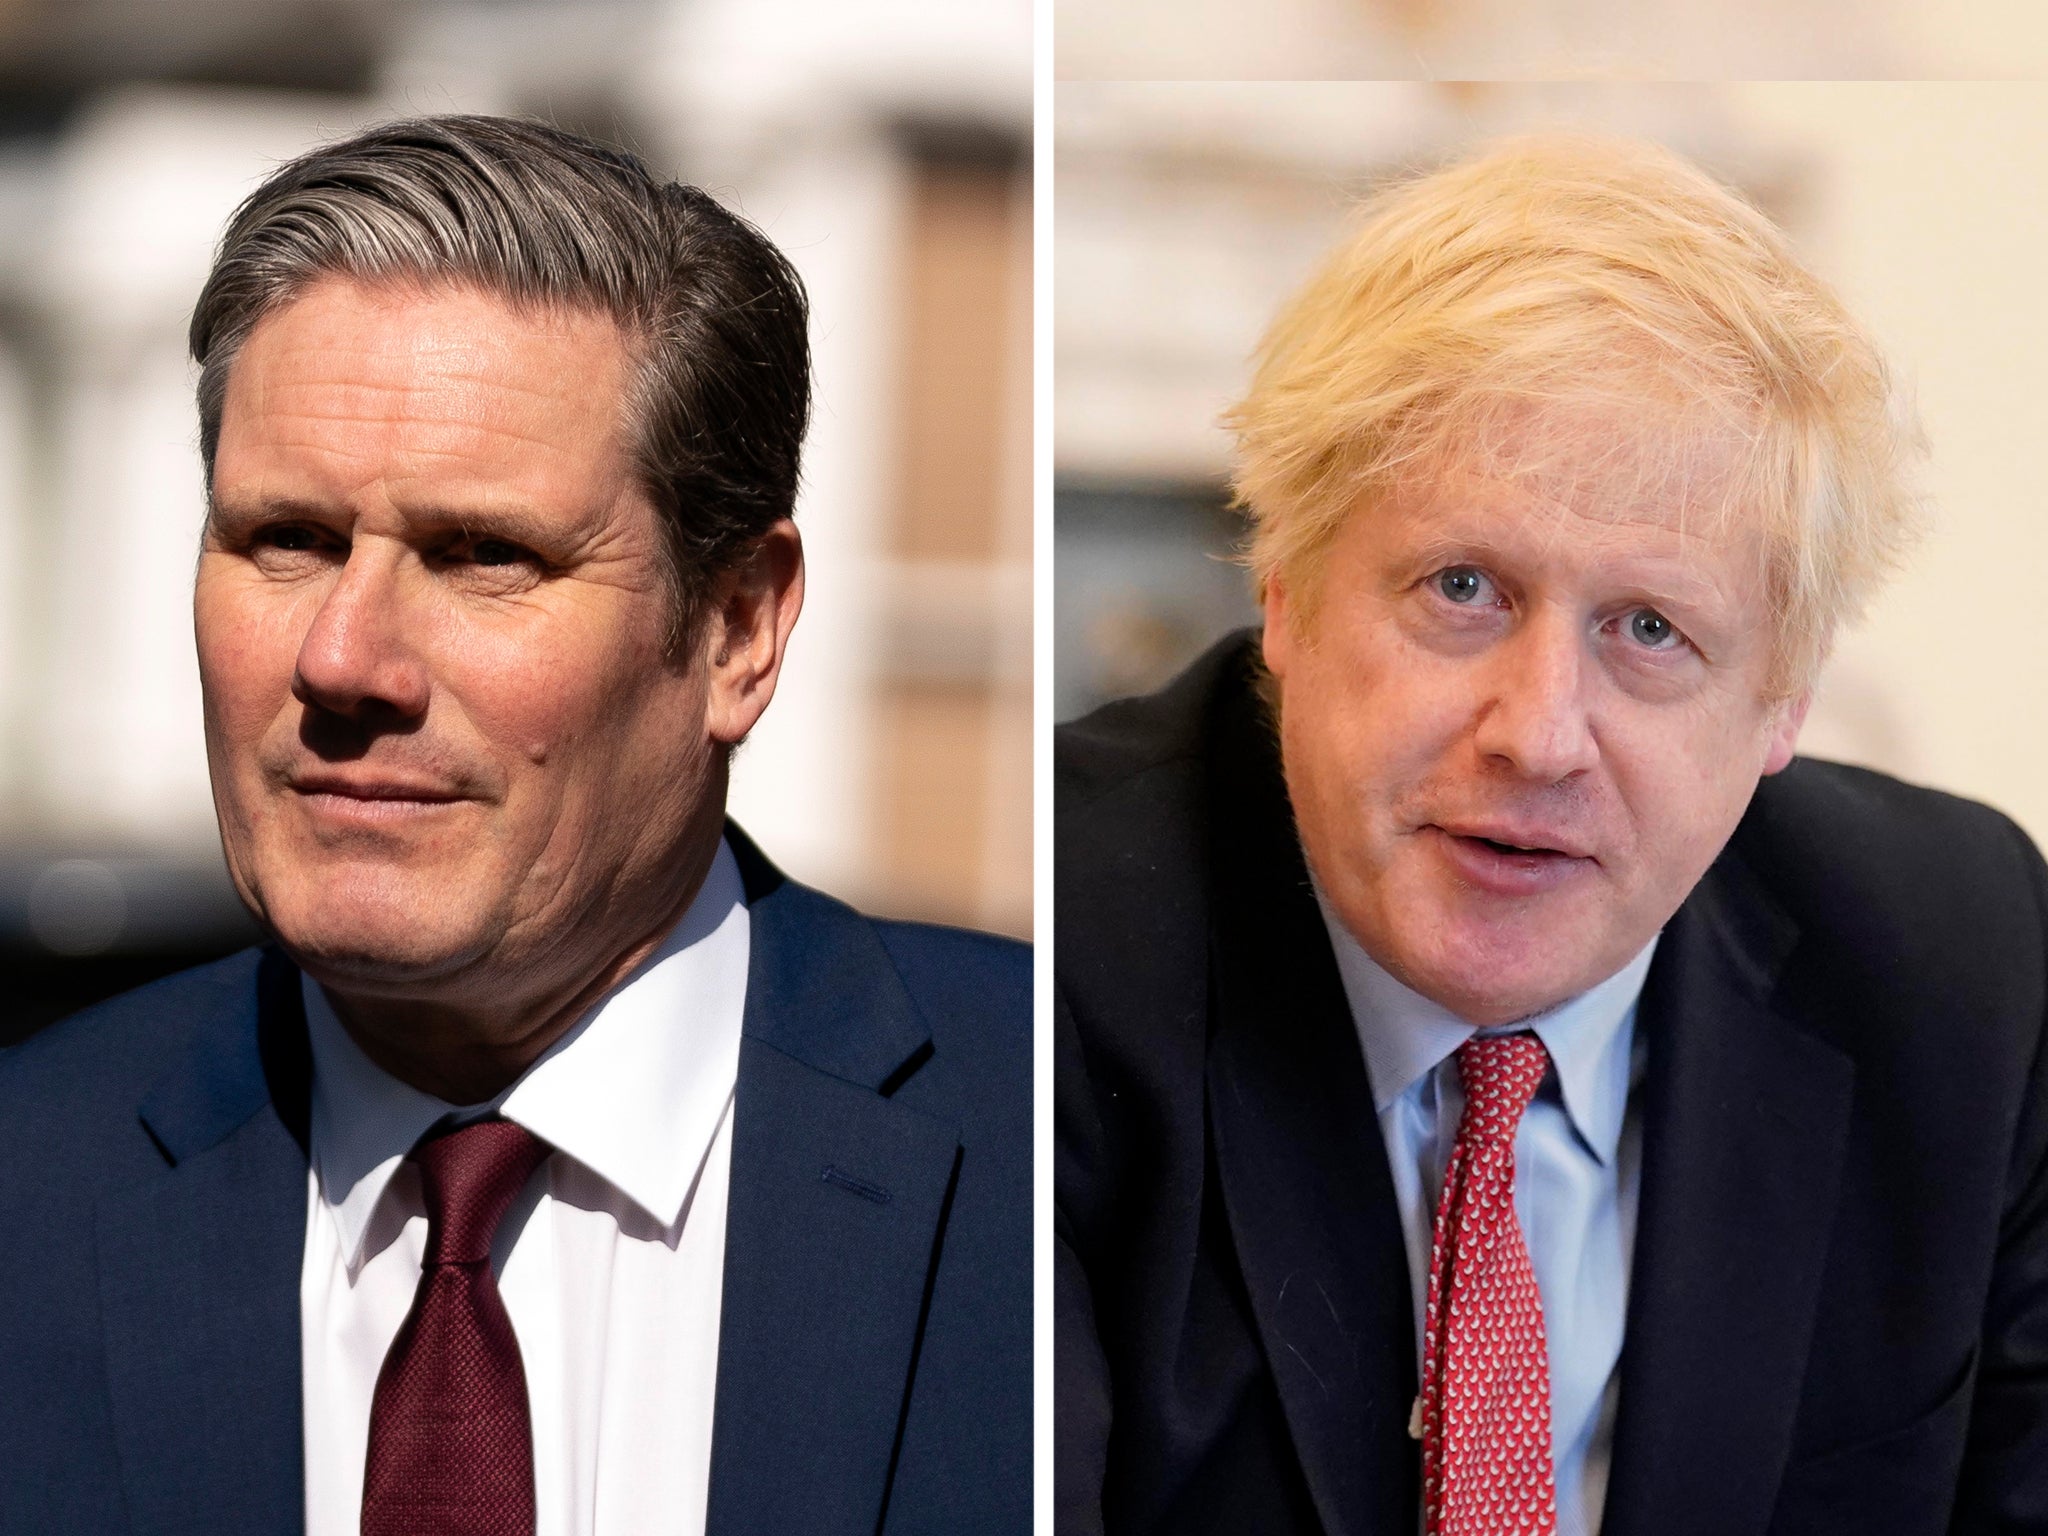 Sir Keir Starmer, left, is likely to face Boris Johnson at the despatch box at PMQs for the first time